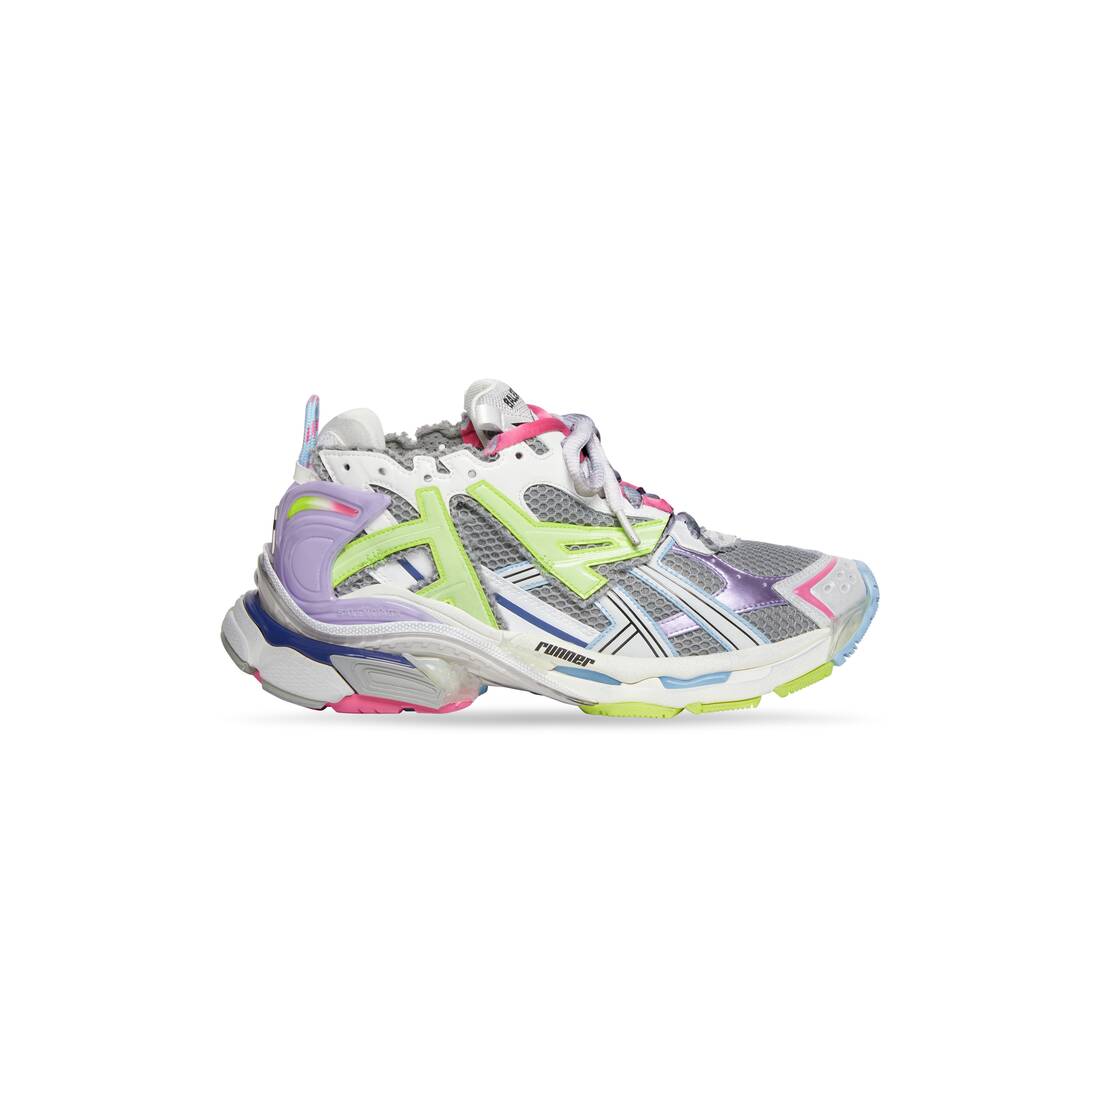 Balenciaga Track sneakers for Women  Multicolored in Kuwait  Level Shoes